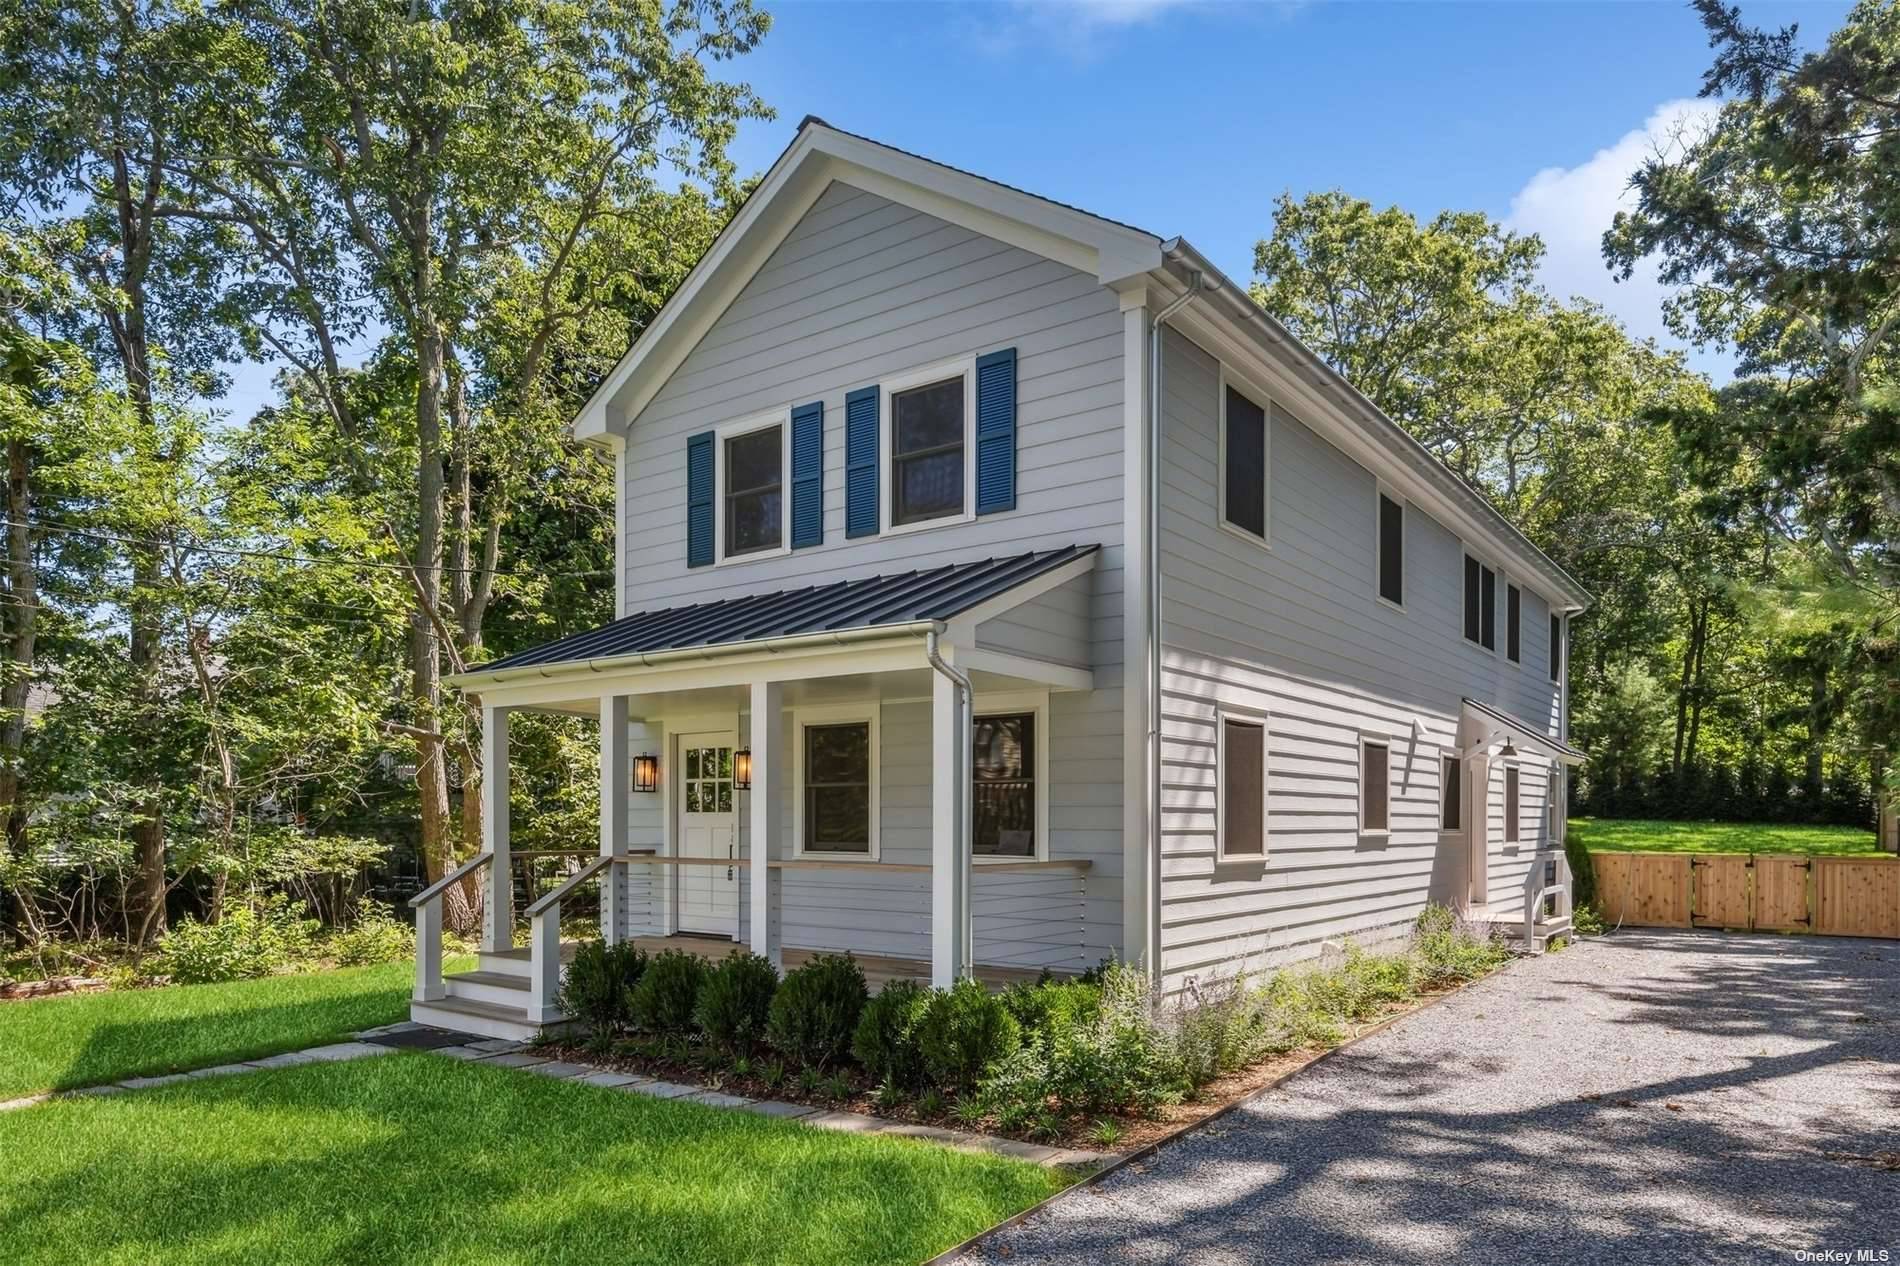 Set on a quiet village street just minutes from the world class shops, restaurants and waterfronts of Sag Harbor lies this newly renovated 4 bedroom, 3.